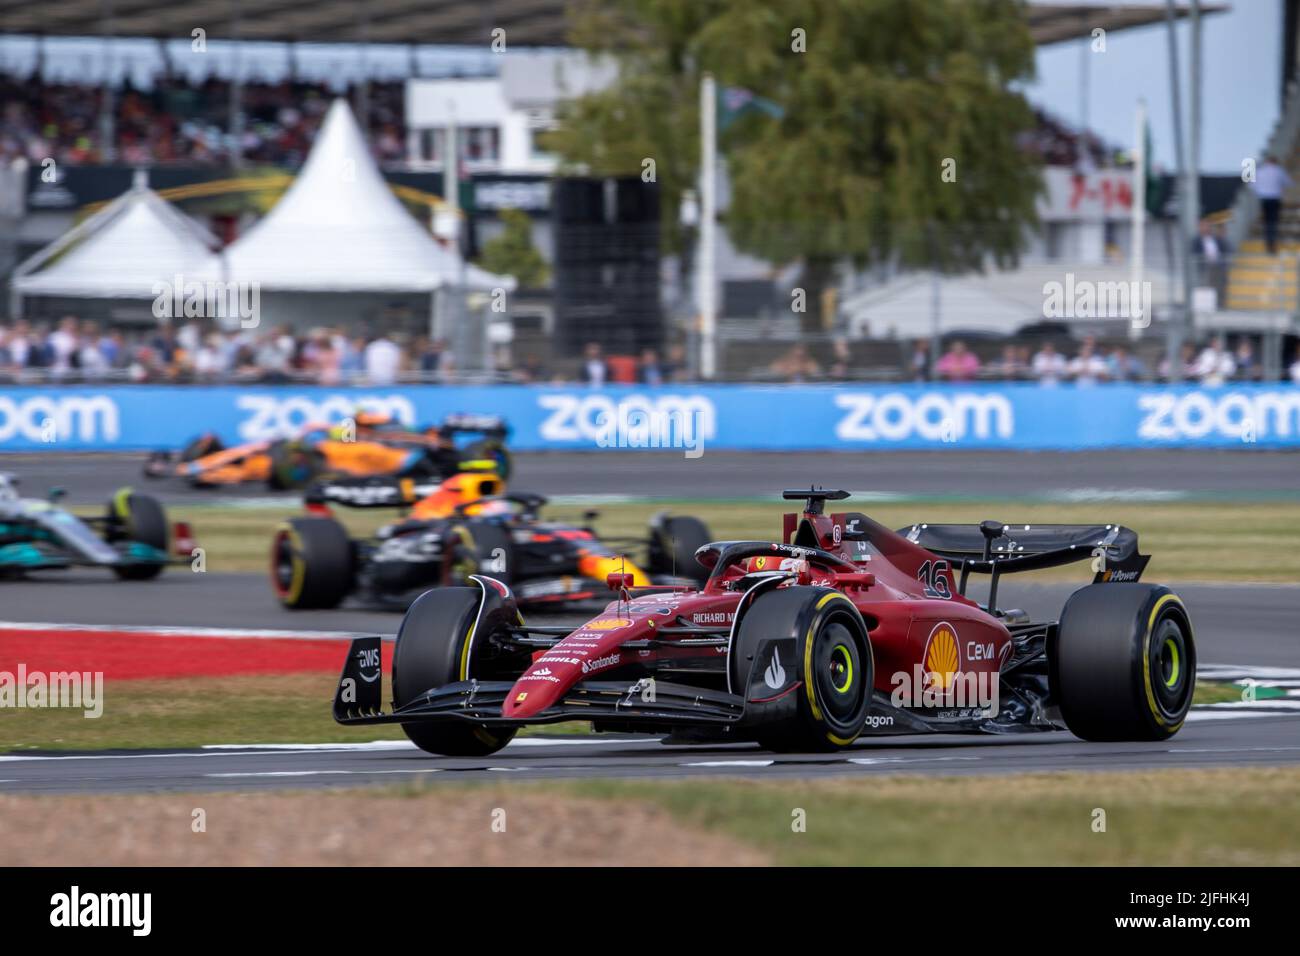 Silverstone, UK. 3rd July 2022, Silverstone Circuit, Silverstone, Northamptonshire, England: British F1 Grand Prix, Race day: Scuderia Ferrari driver Charles Leclerc in his Ferrari F1-75 leads the opening laps of the restart Credit: Action Plus Sports Images/Alamy Live News Stock Photo